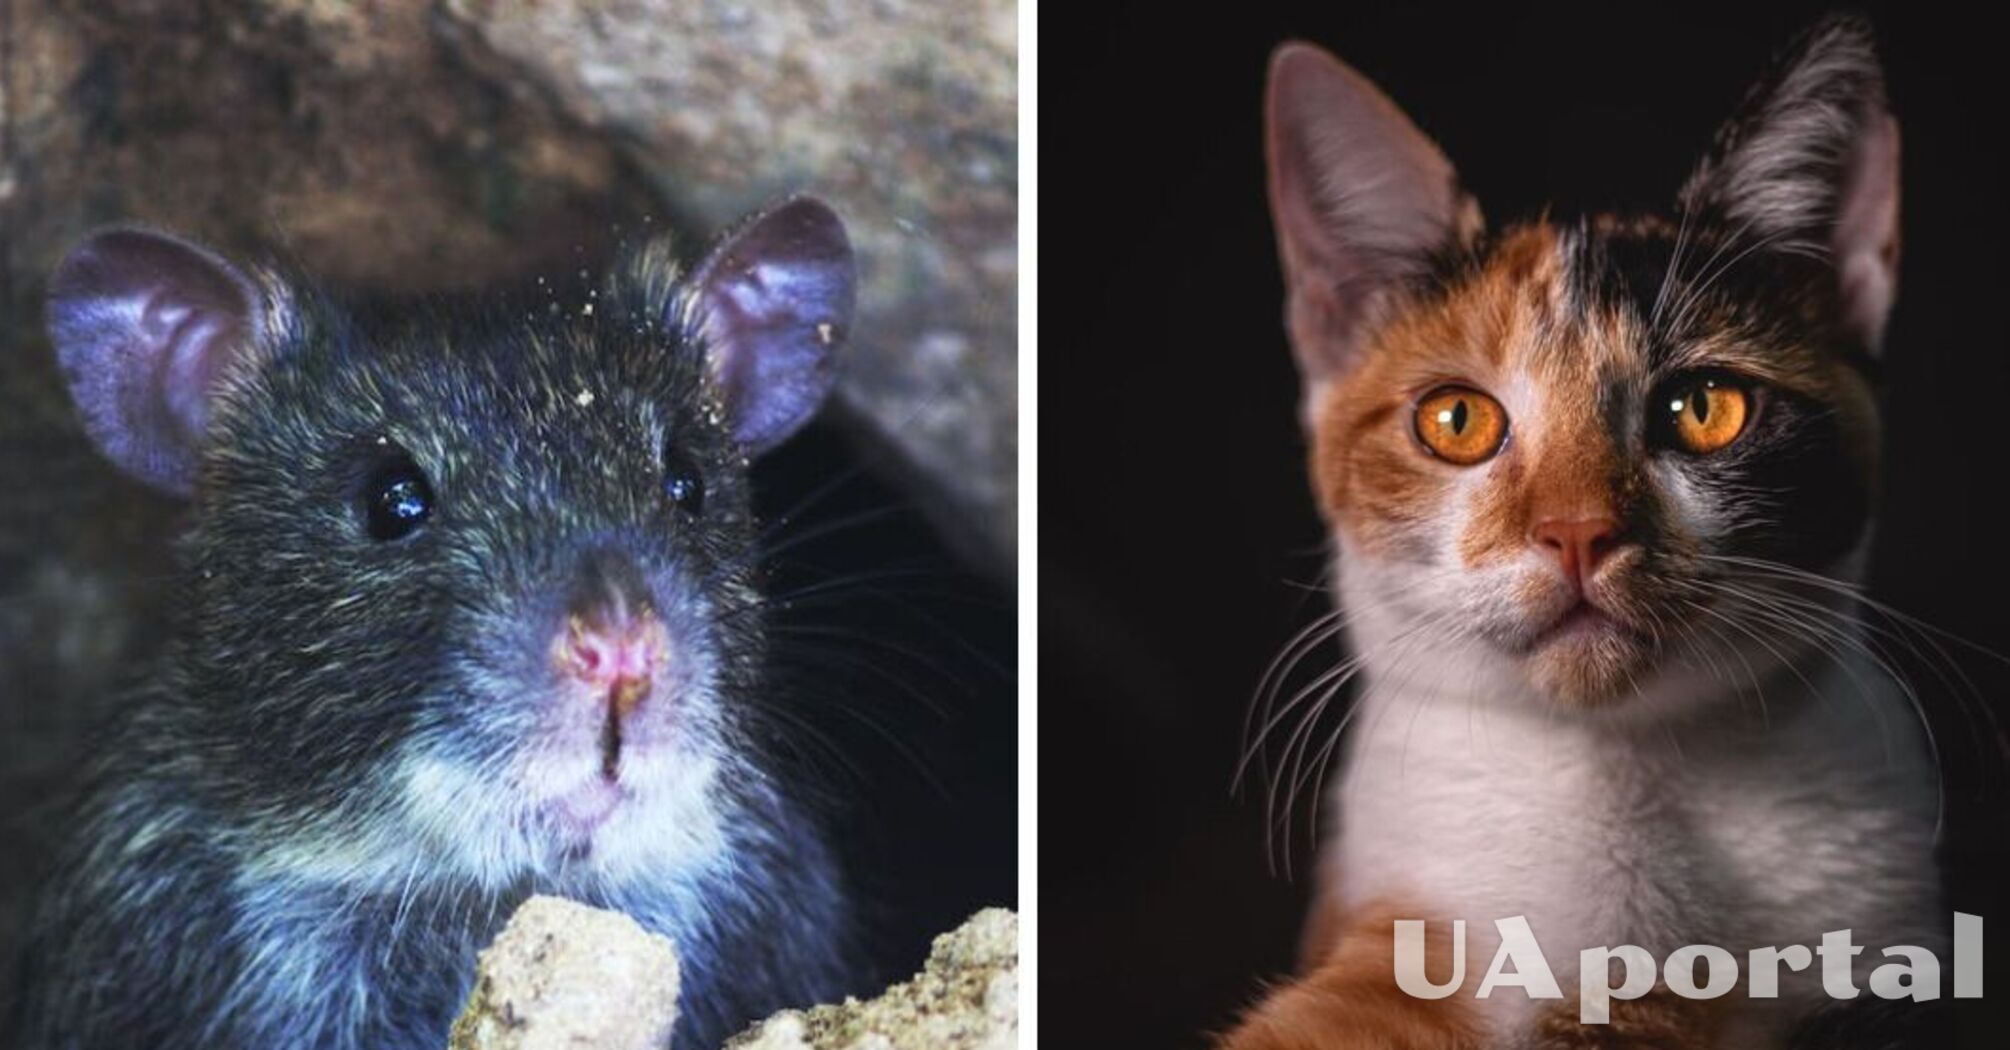 Why cats play with mice before killing them: the answer will surprise you